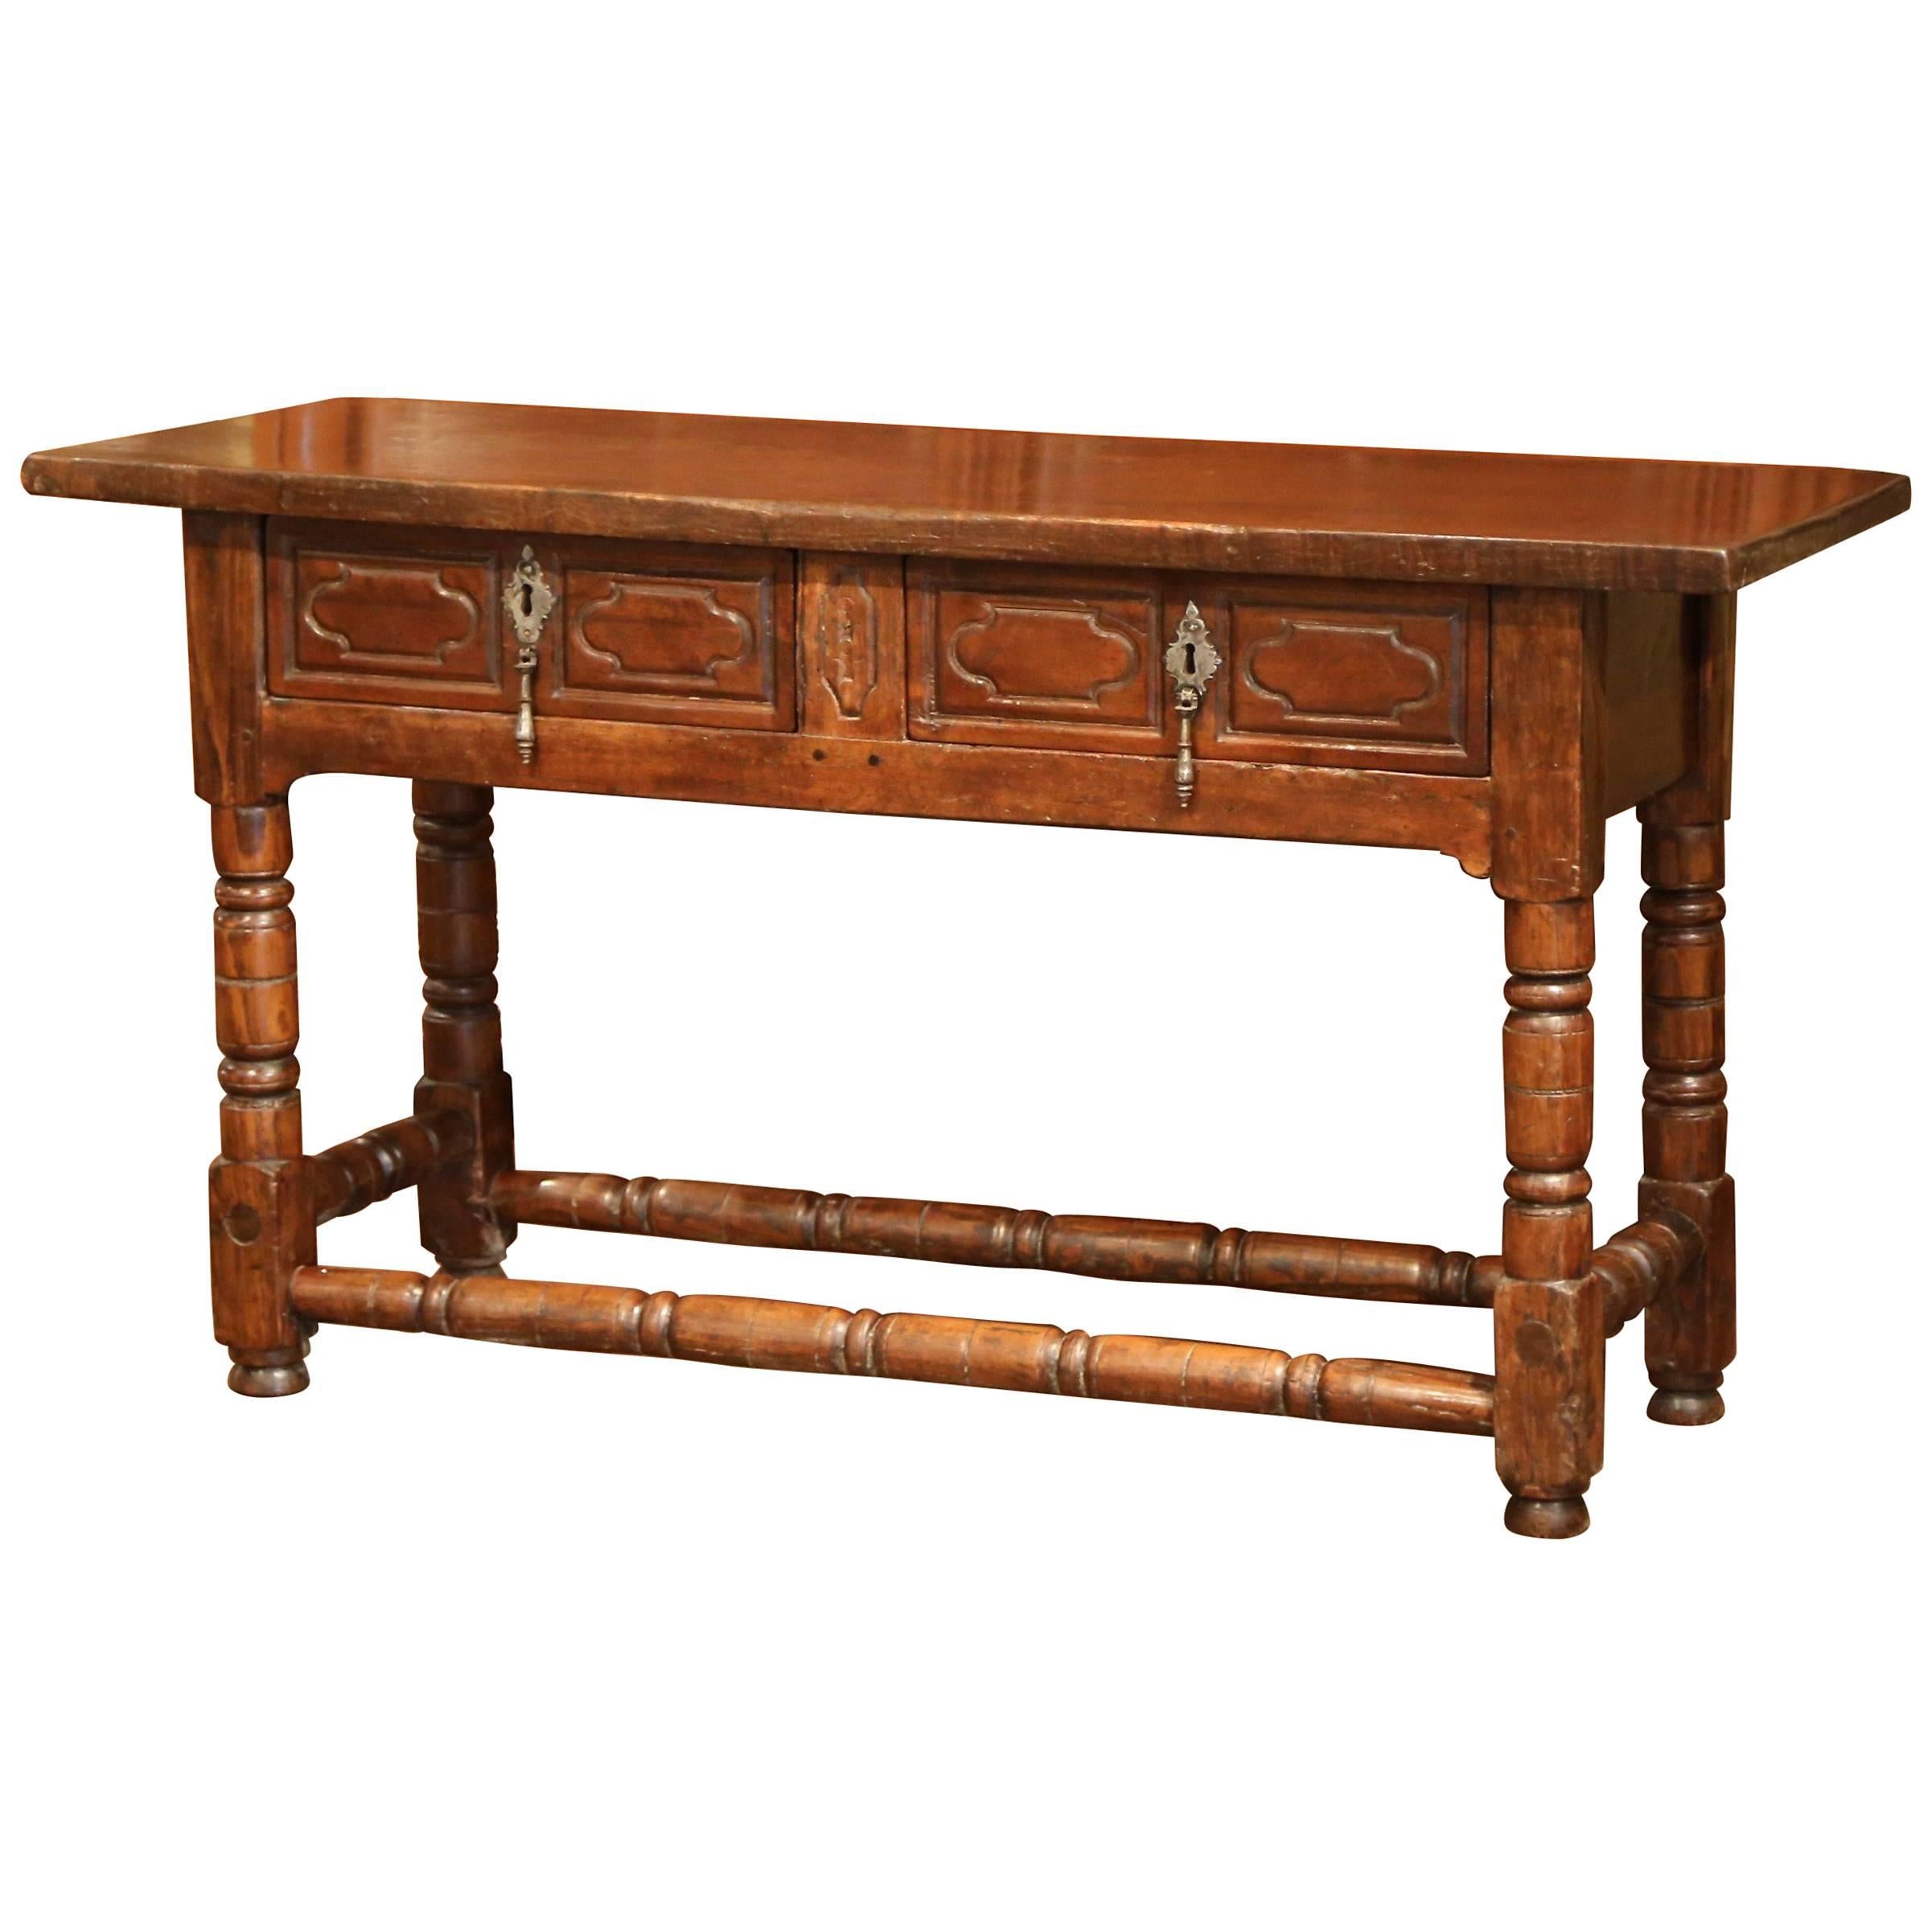 18th Century Spanish Louis XIII Carved Chestnut Console Sofa Table with Drawers